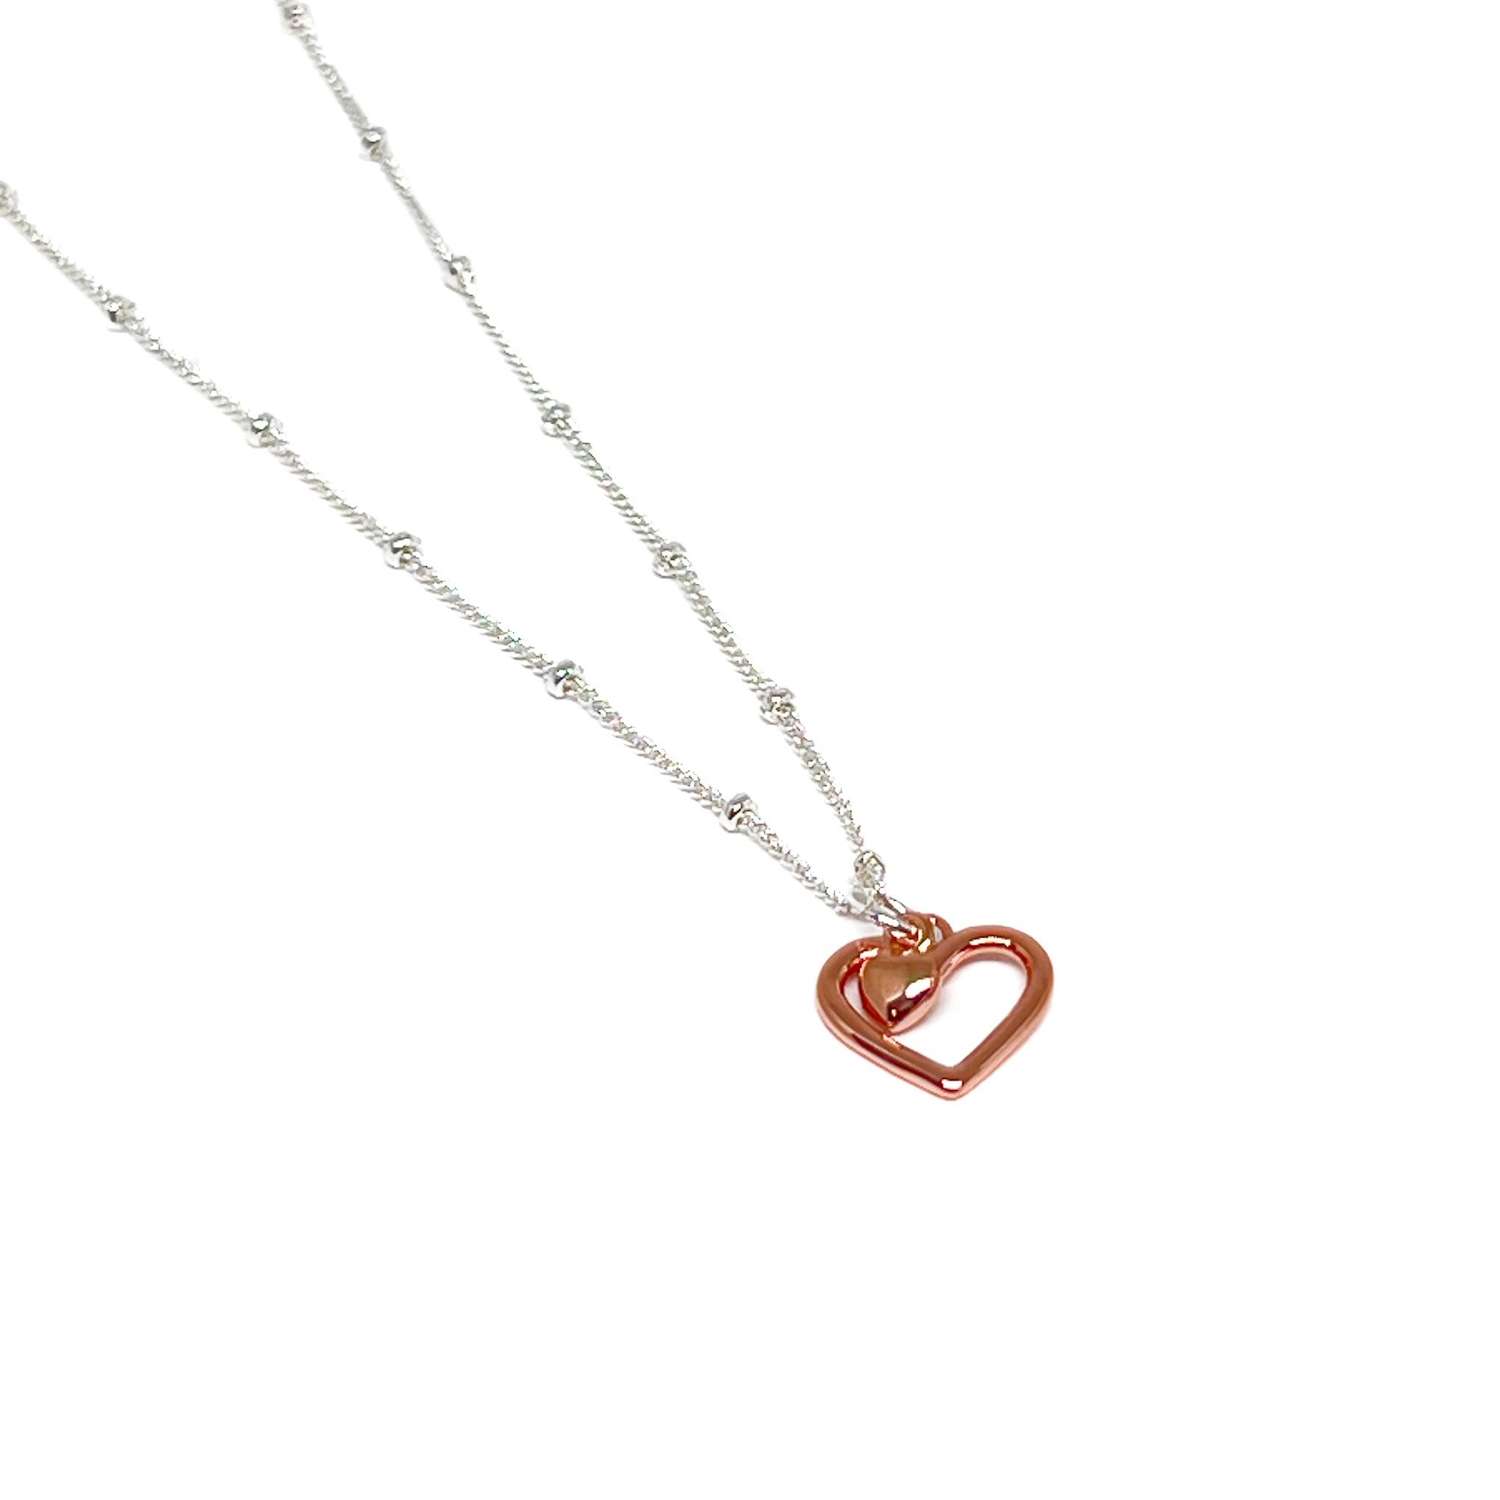 Alba Heart Necklace - Rose Gold